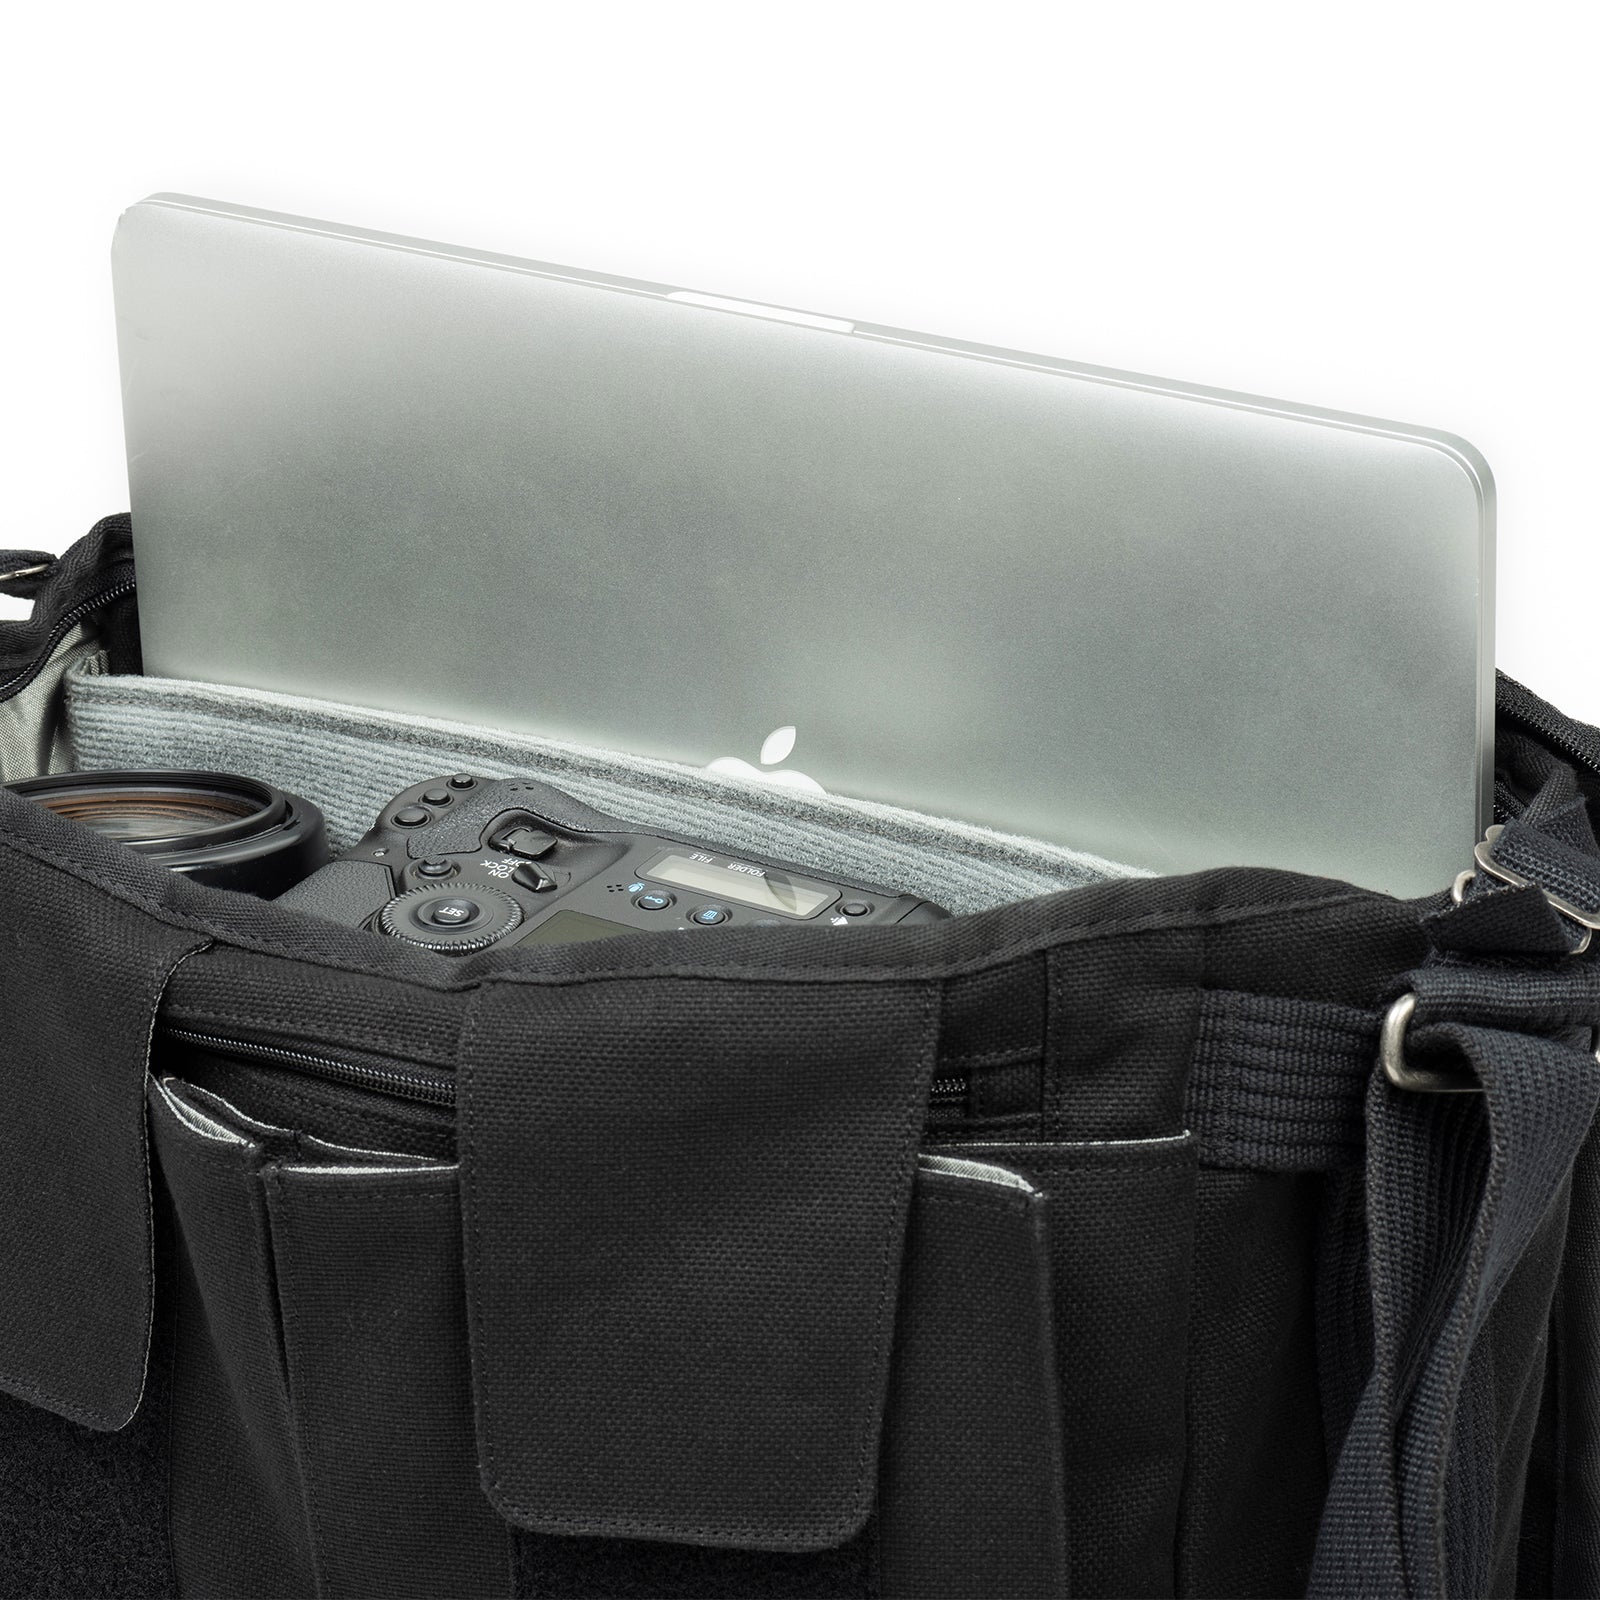 Dedicated pocket fits a tablet or up to a 15" laptop